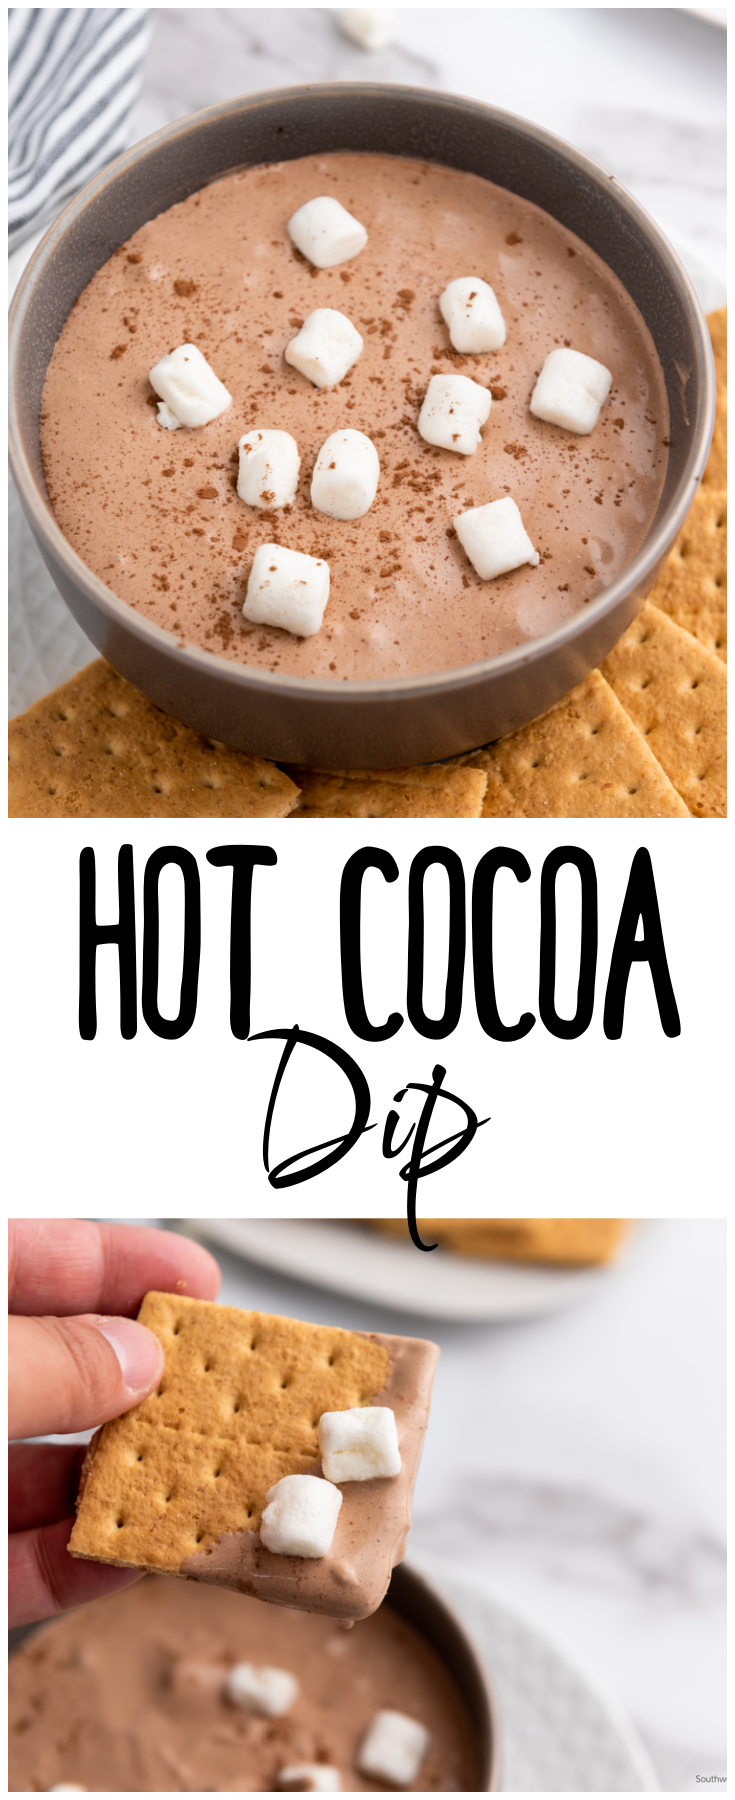 This easy Hot Cocoa Dip combines all of your favorite cozy hot cocoa flavors in a tasty dip that's super simple to throw together and delicious to eat!